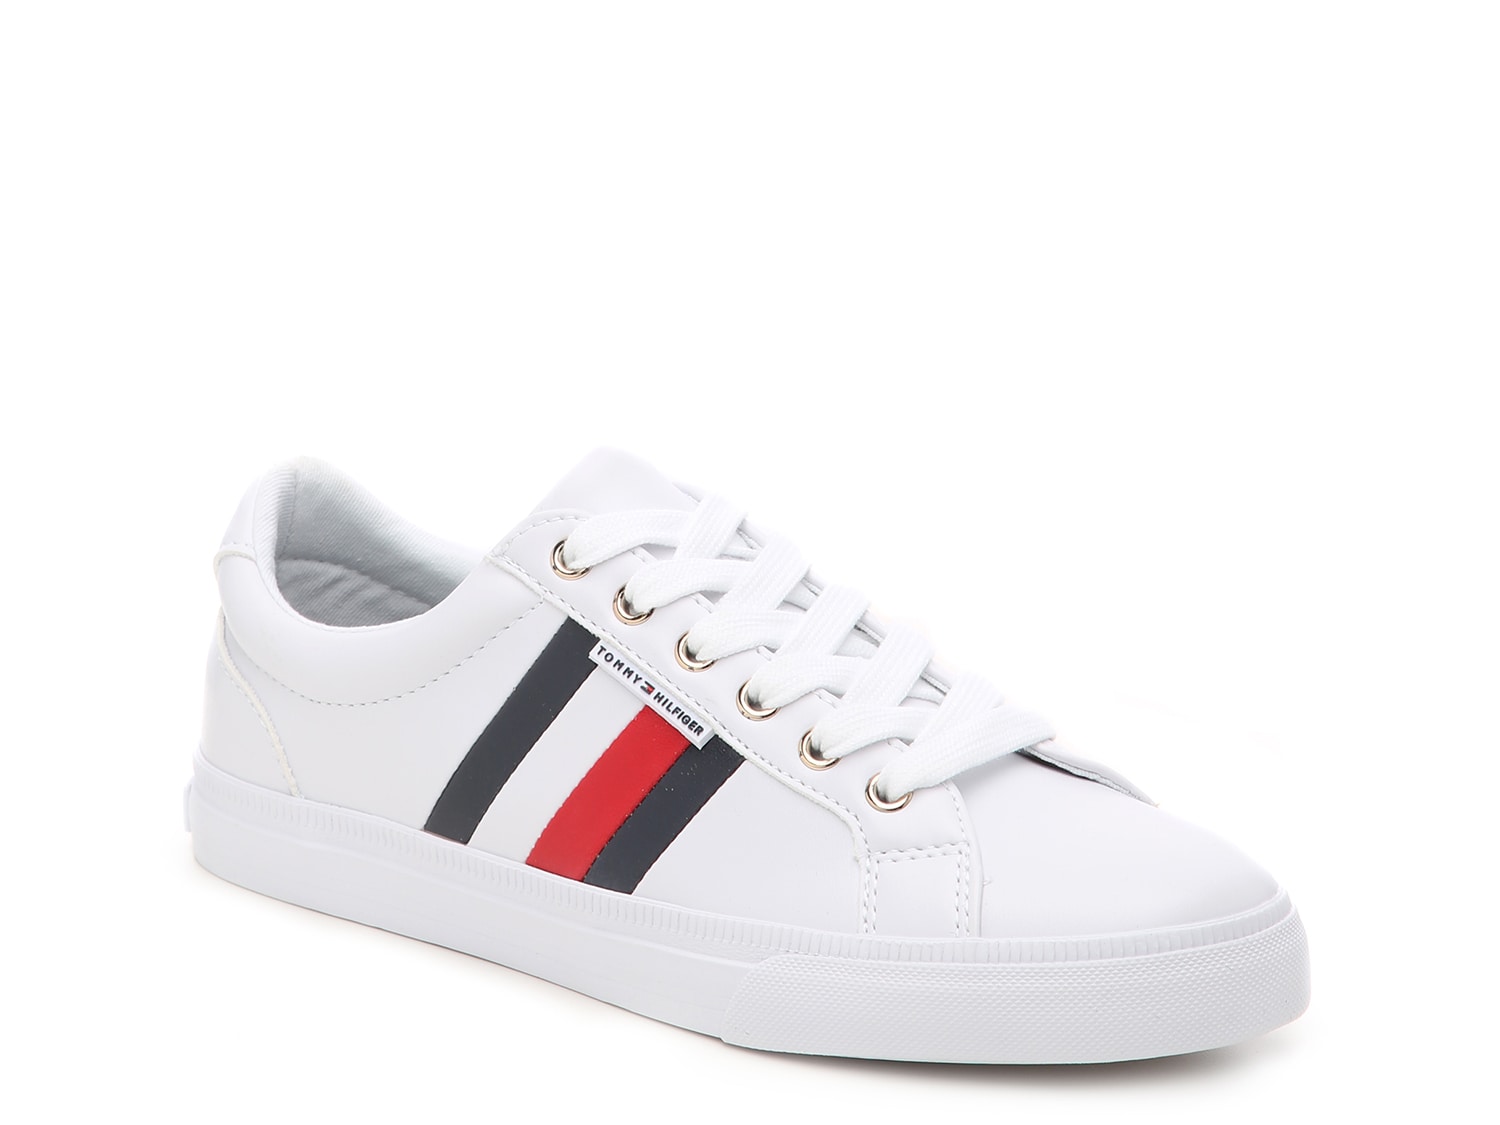 tommy hilfiger shoes price Cheaper Than 